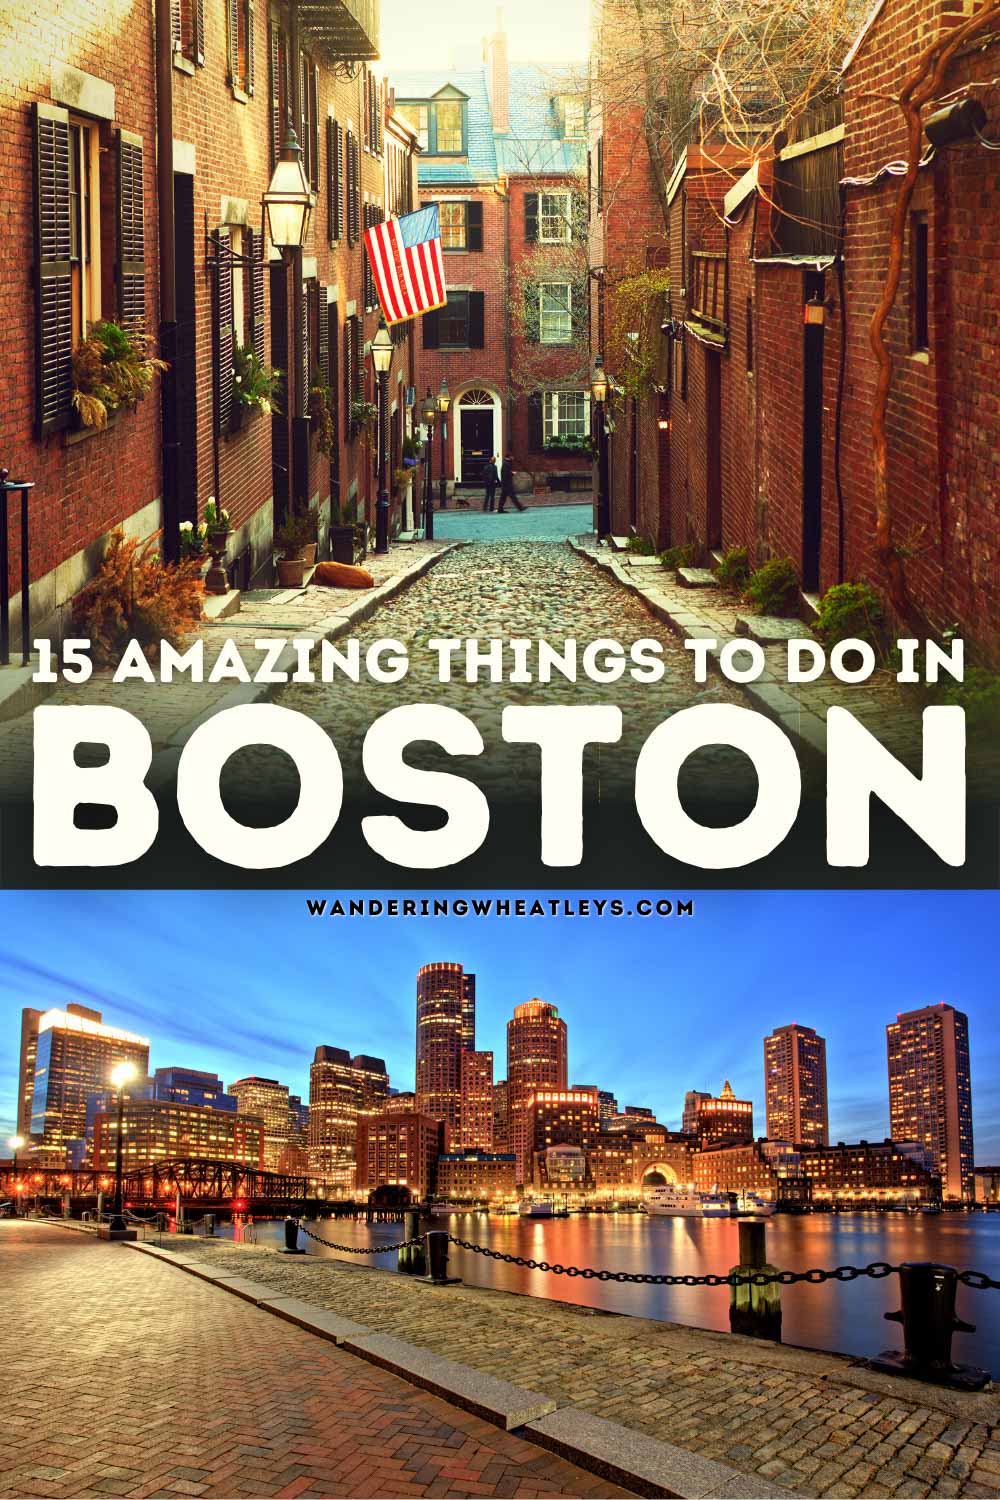 The Best Things to do in Boston